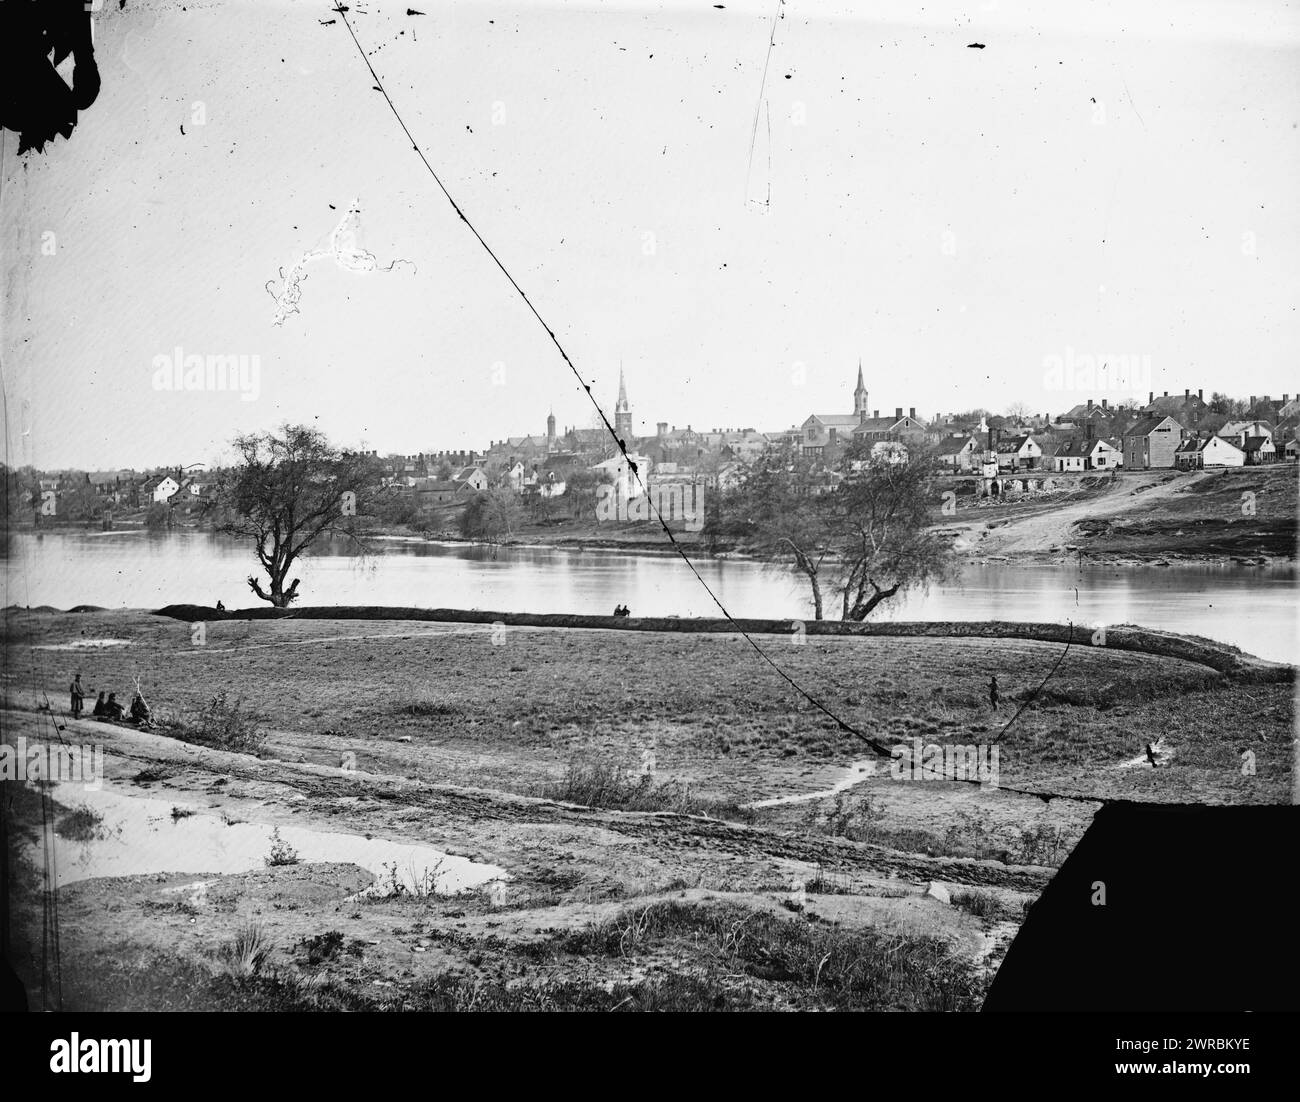 View of lower end of Fredericksburg, ..., Feb. 1863., United States, History, Civil War, 1861-1865, Glass negatives, 1860-1870, 1 negative: glass, wet collodion Stock Photo